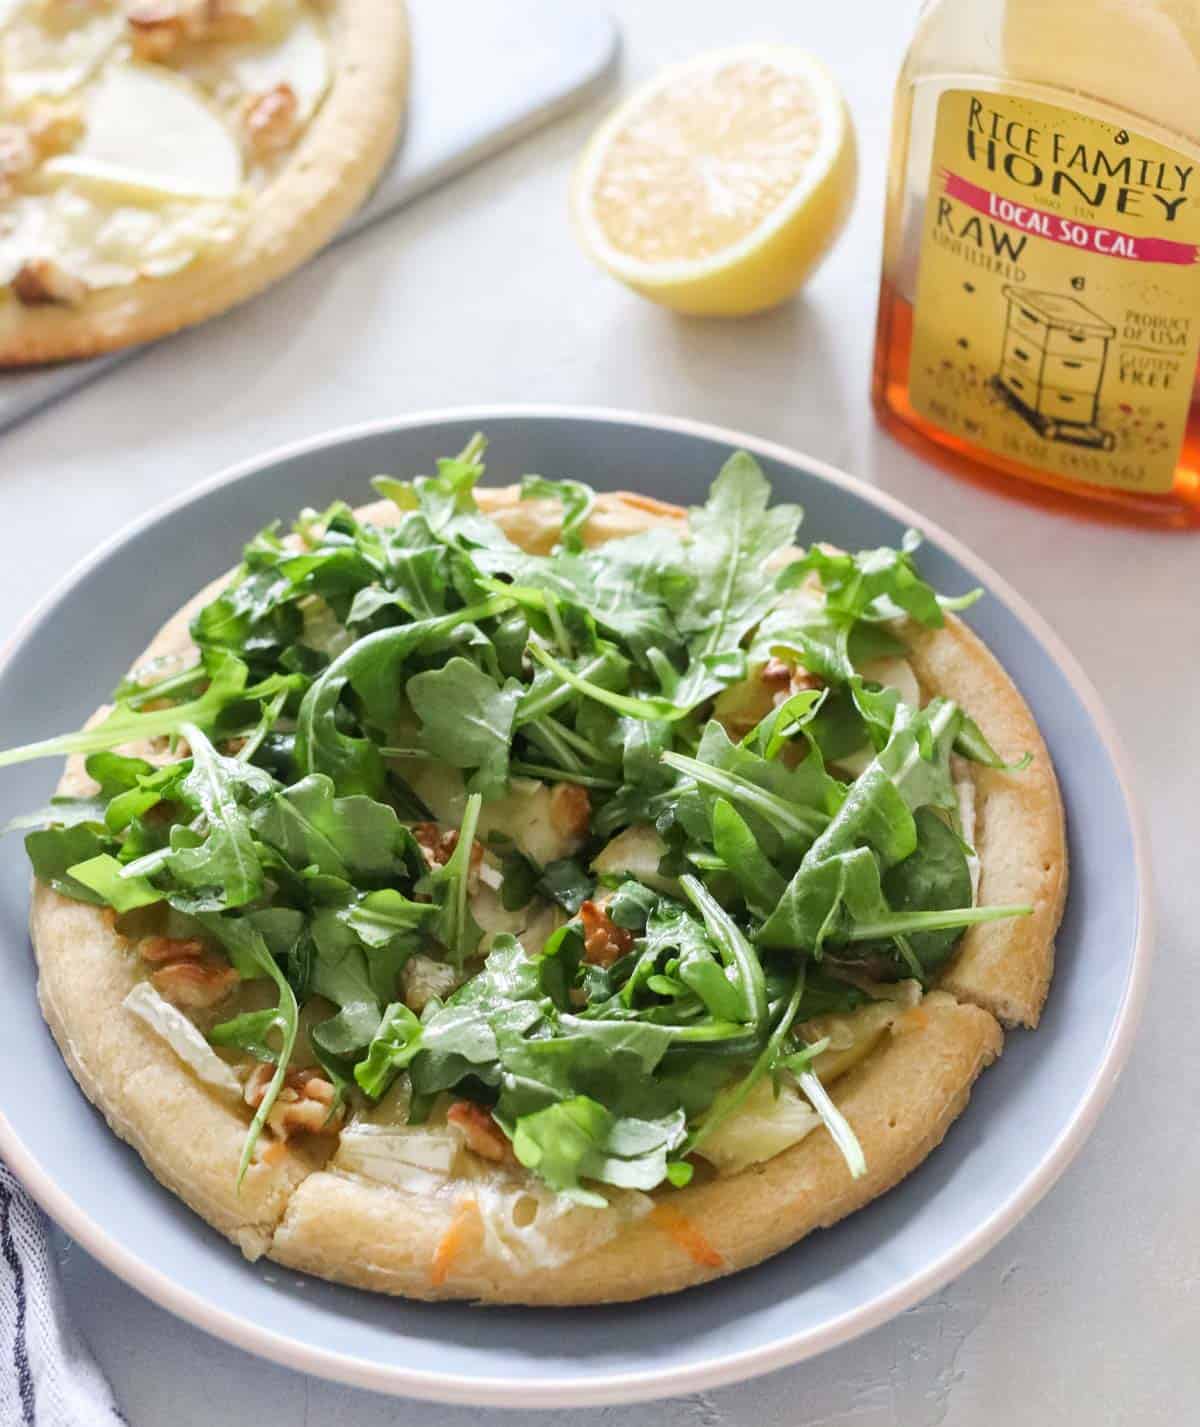 personal pizza topped with arugula on a blue plate next to a bottle of honey, a cut lemon, and a cutting board with another apple brie pizza